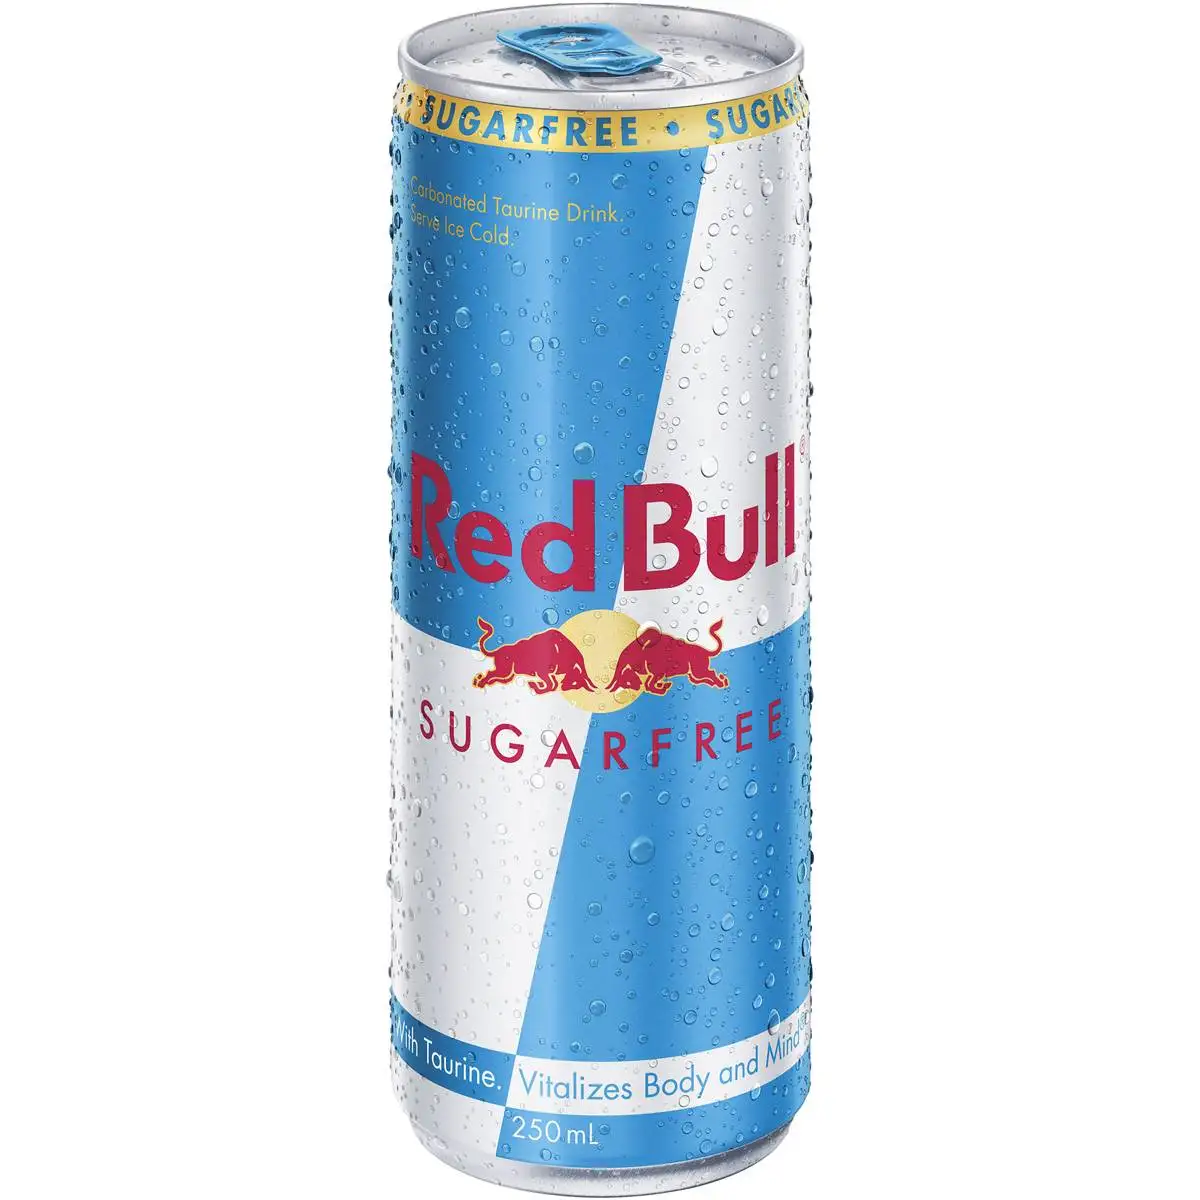 ENERGY DRINK FOR SALE AT WHOLESALE PRICE RED BULLS